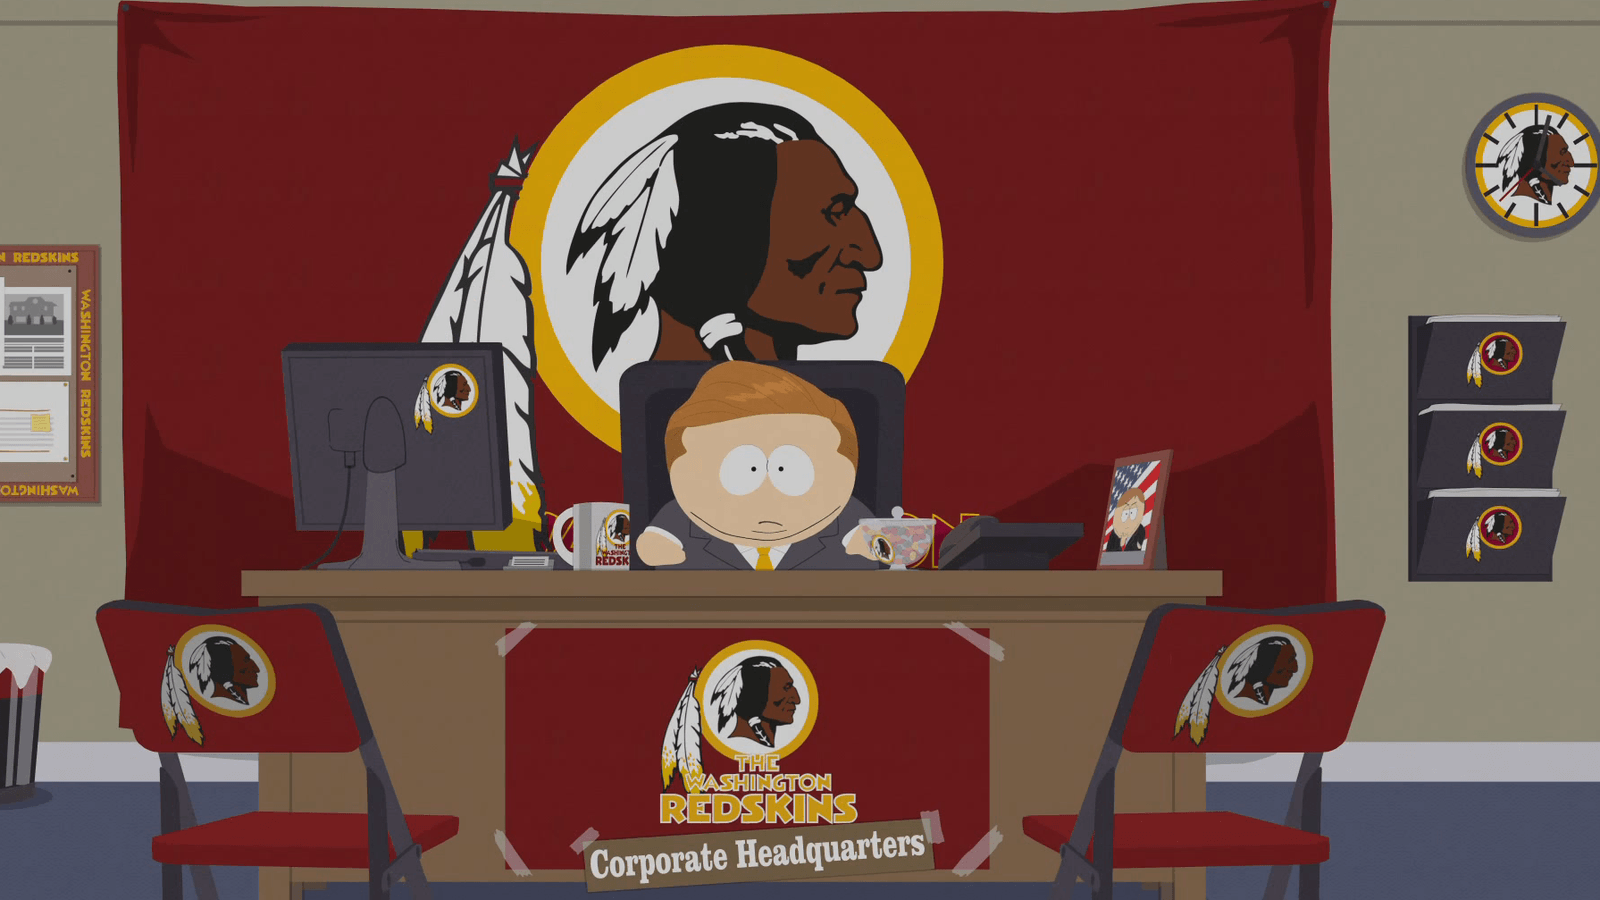 The Washington Redskins are terrible at football and at Cyber